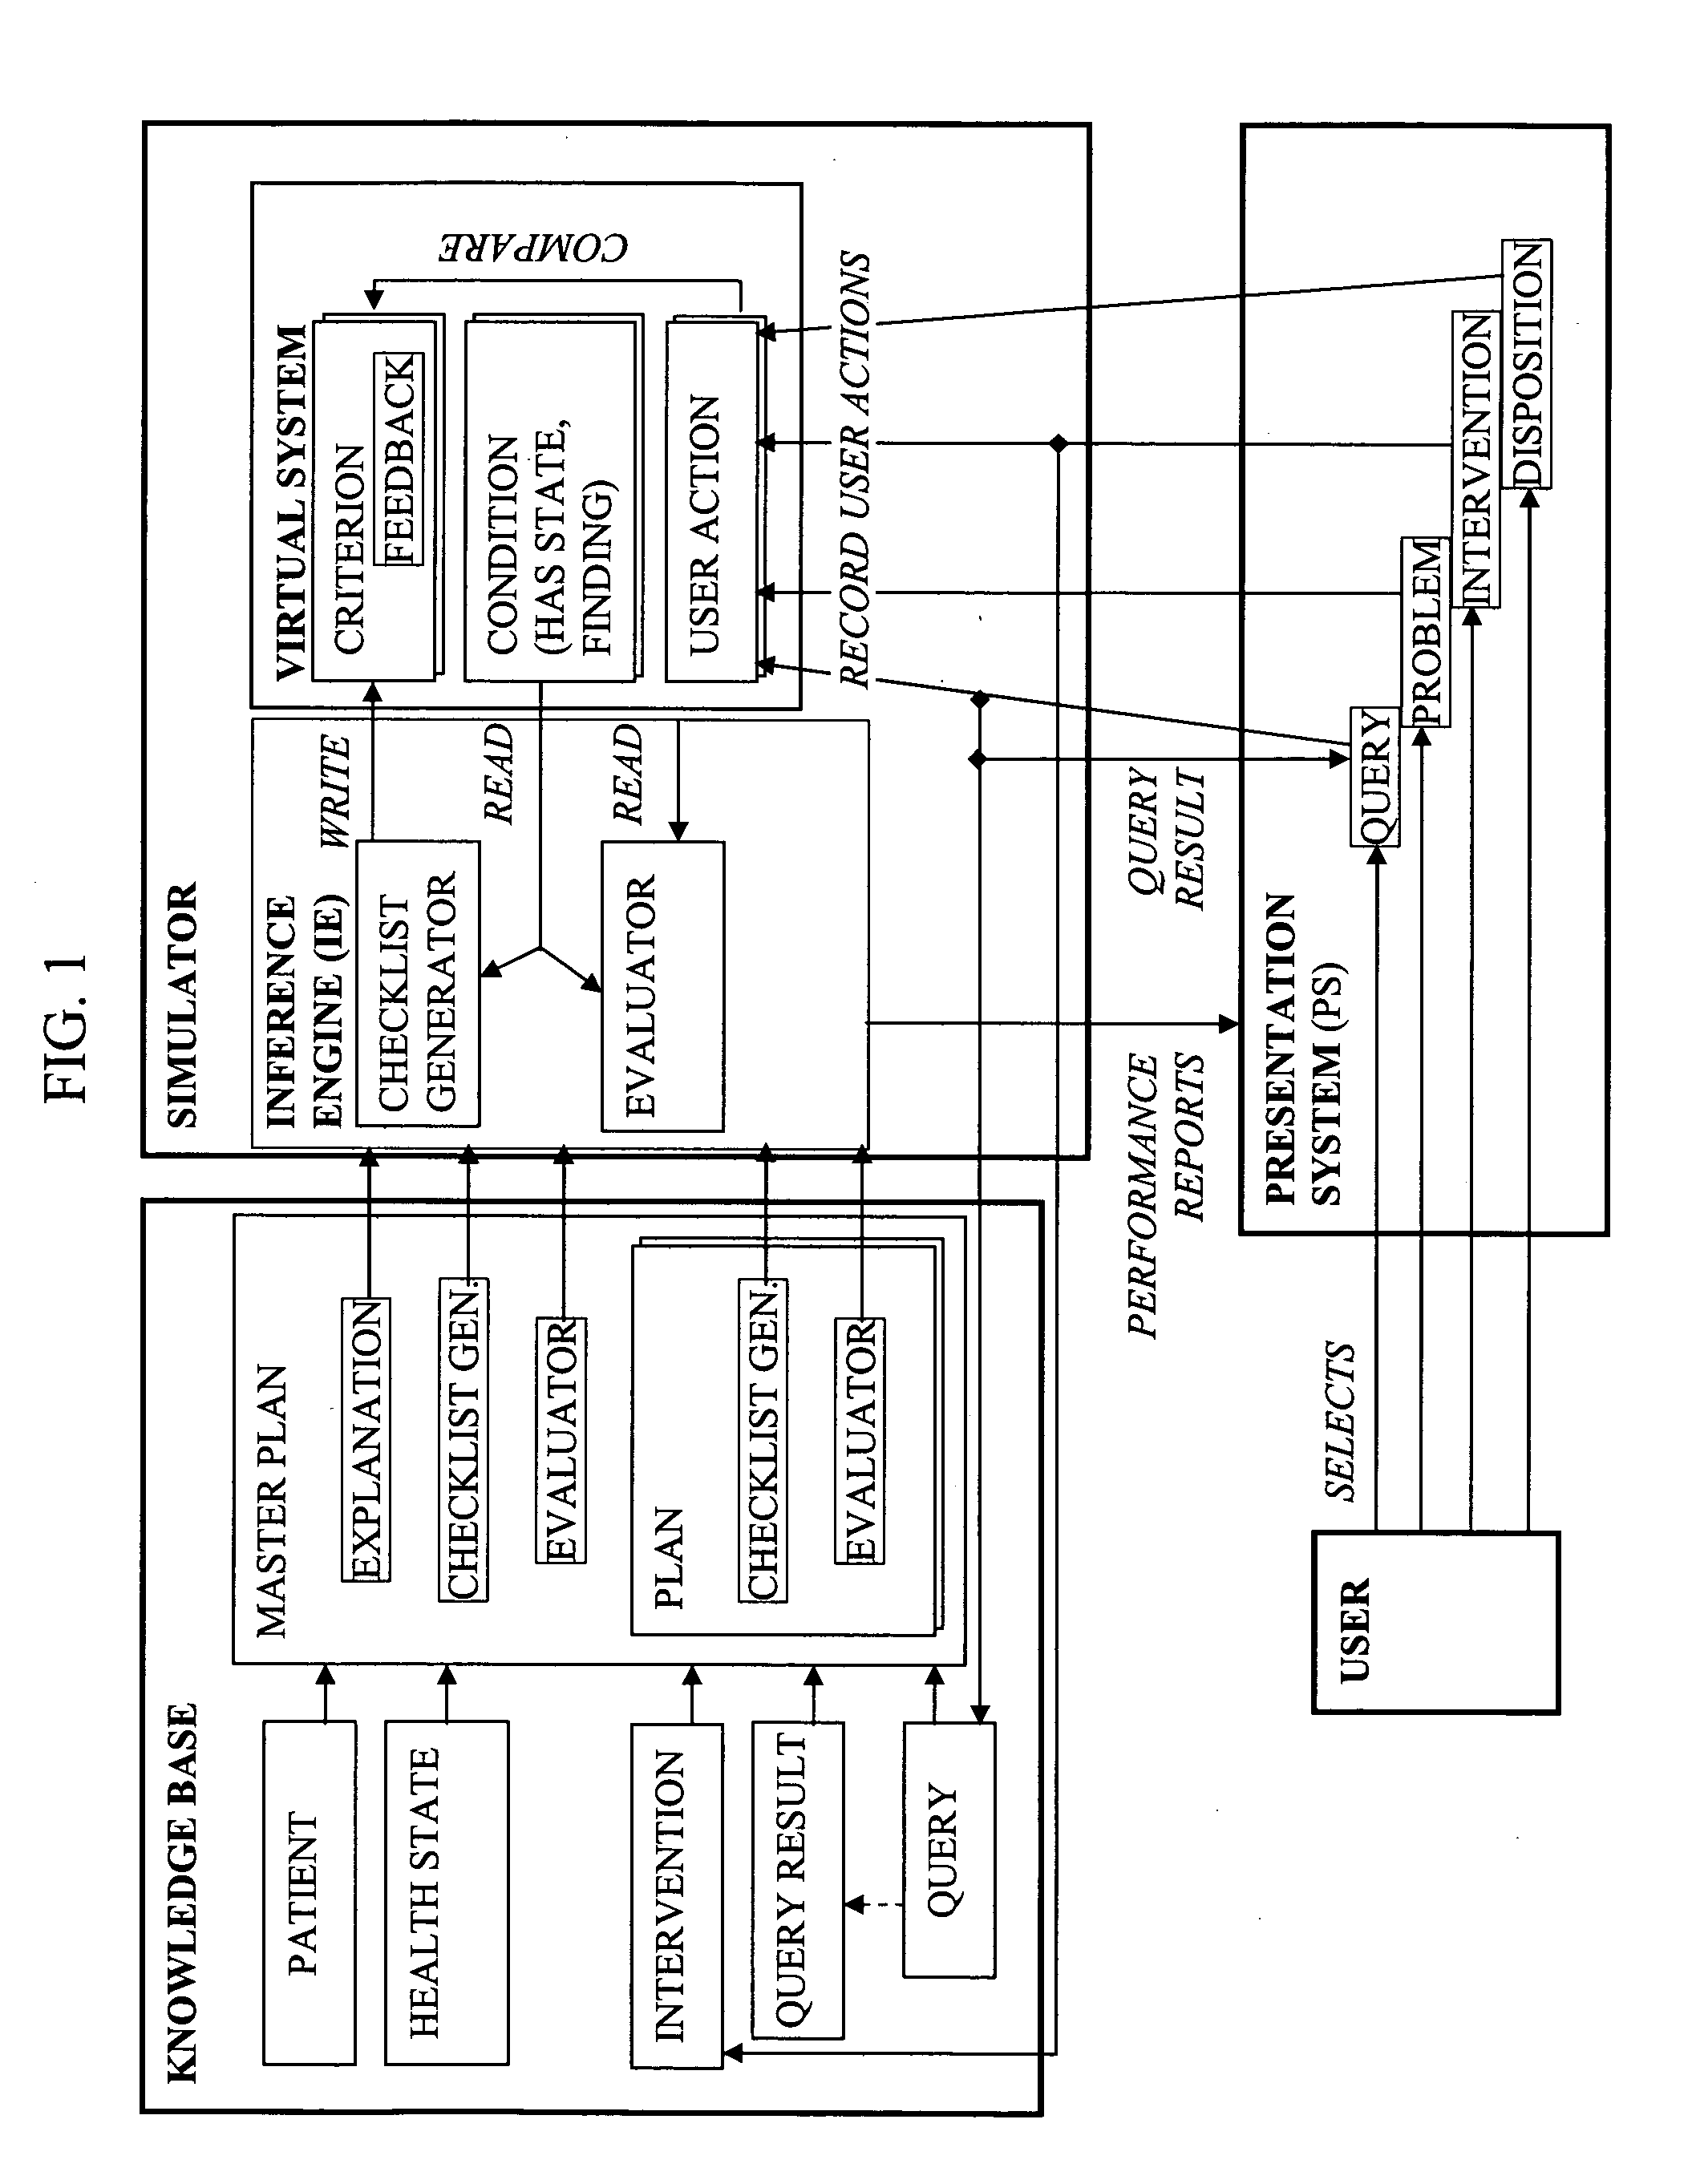 Computer architecture and process of user evaluation